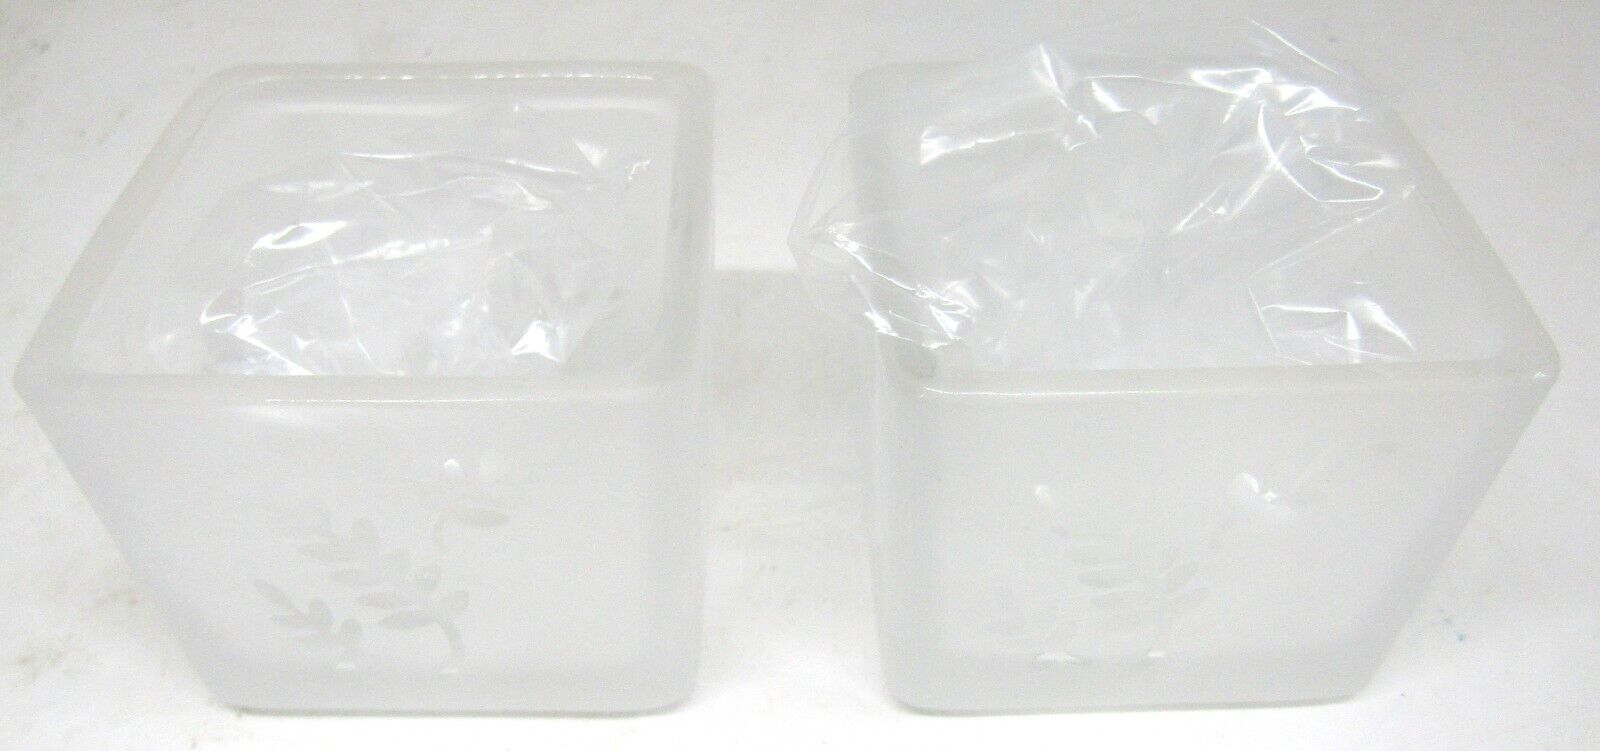 PartyLite P7235 Square Pair Frosted Glass Votive Candle Holders With leaf